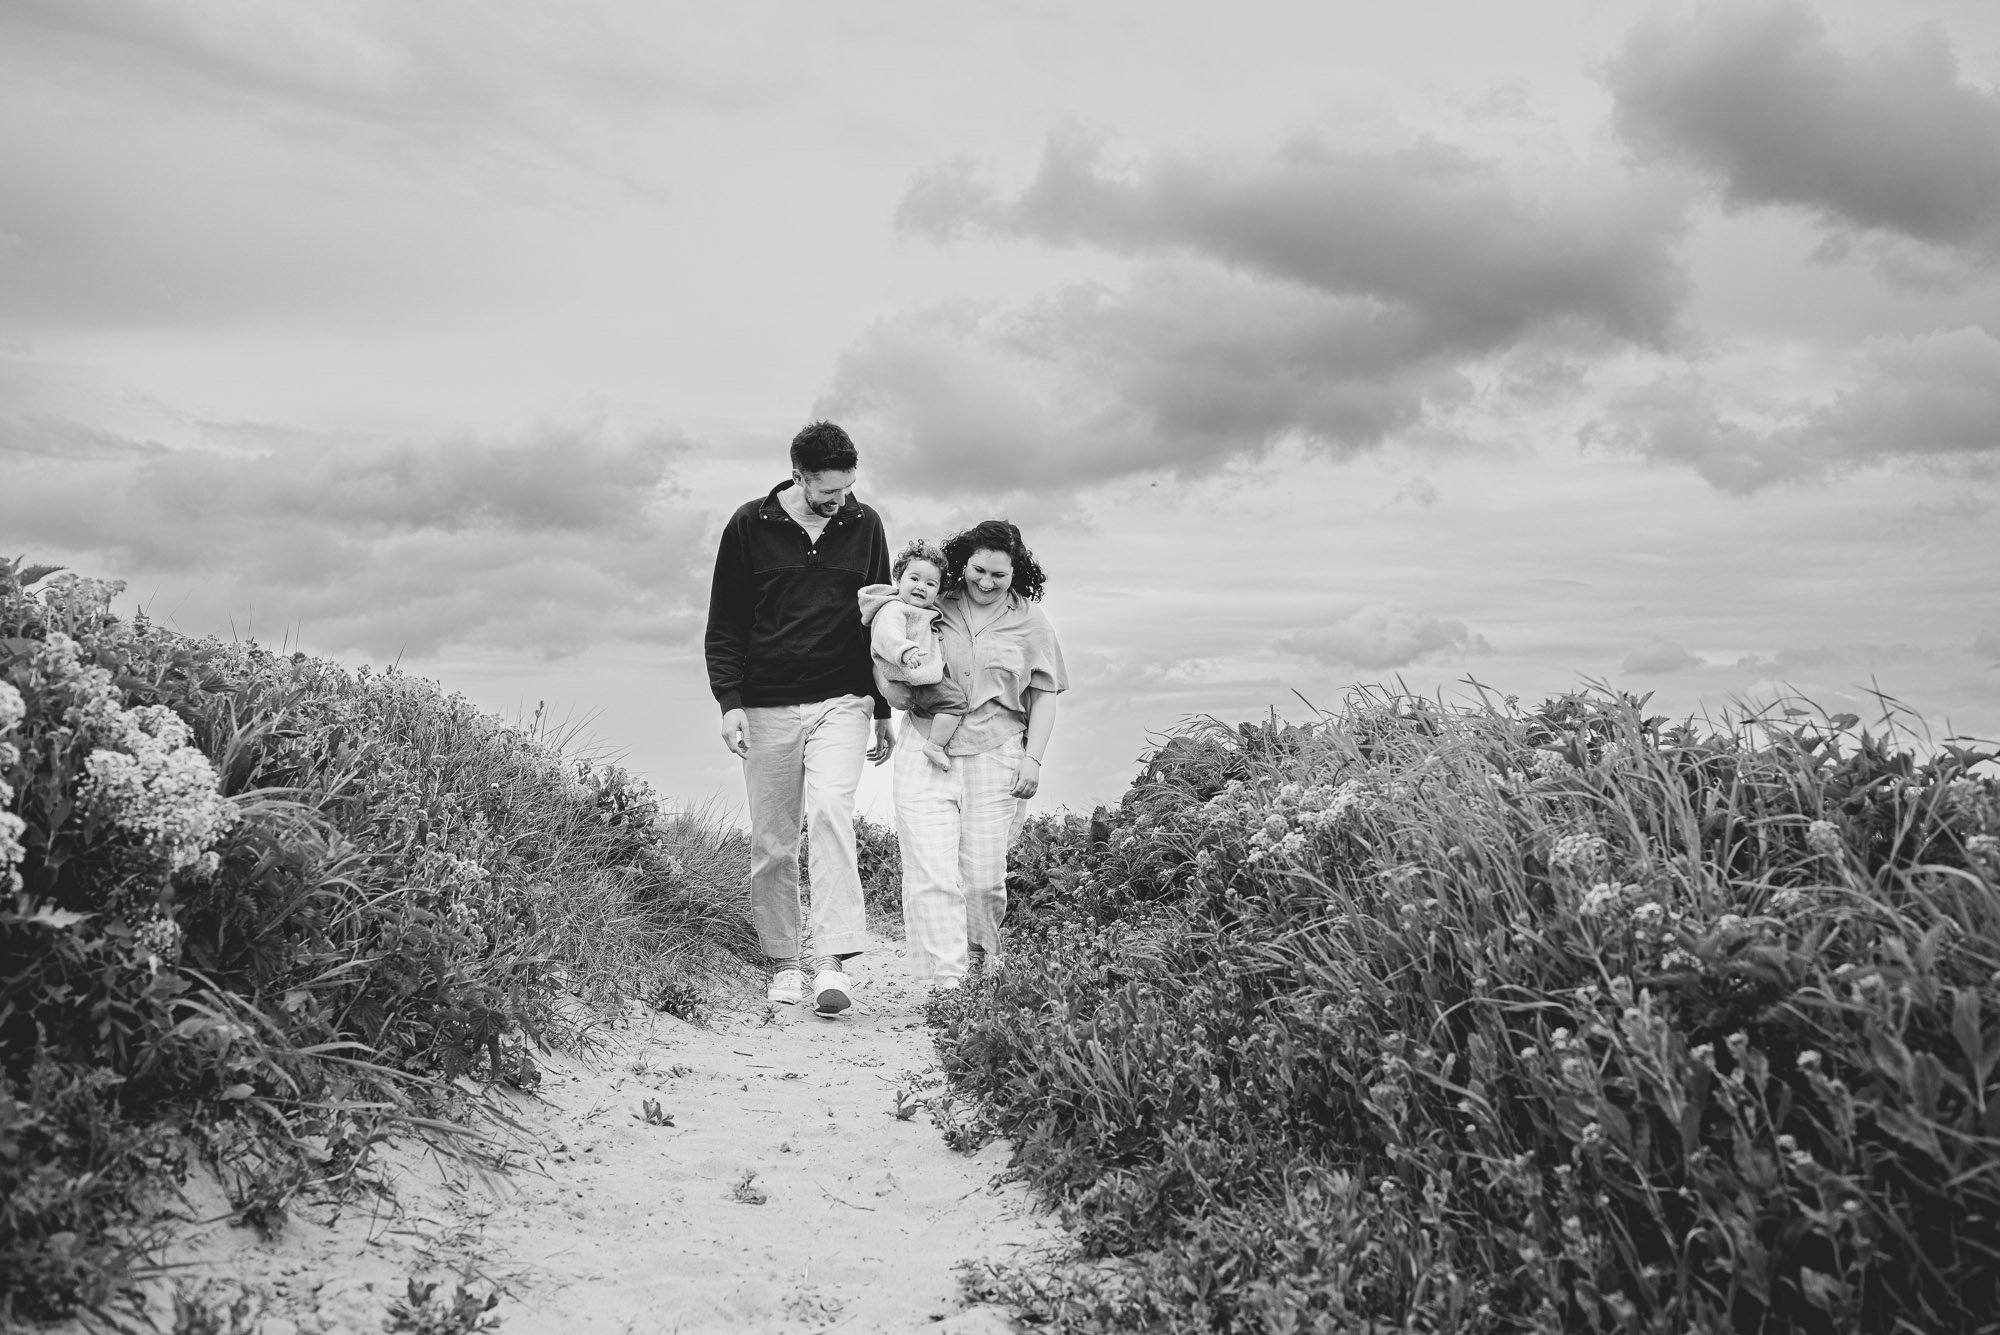 nautral-family-portrait-black-and-white-beach-west-wittering-clouds-walking-towards-camera.jpg